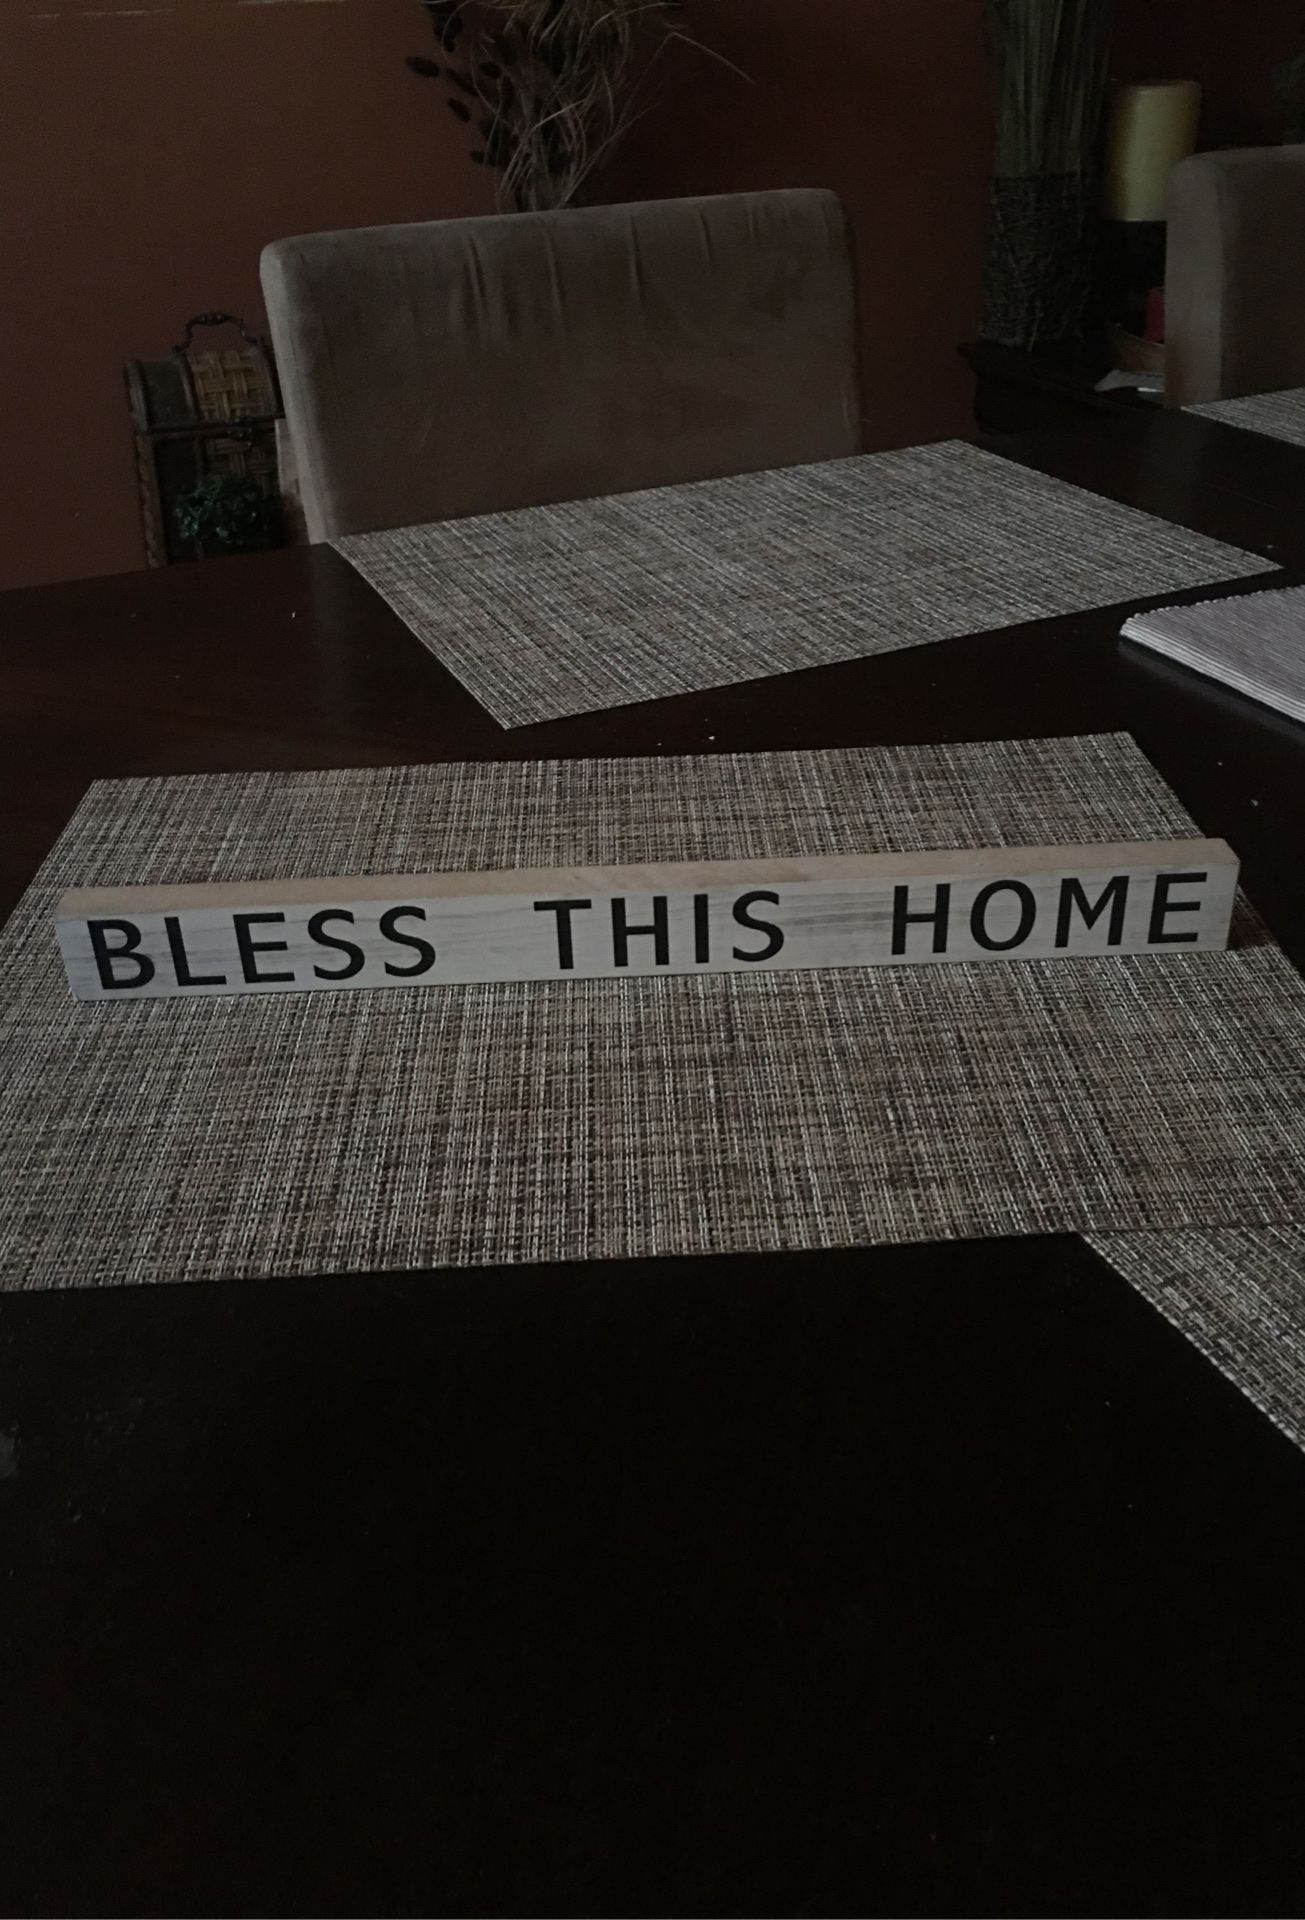 Bless home sign